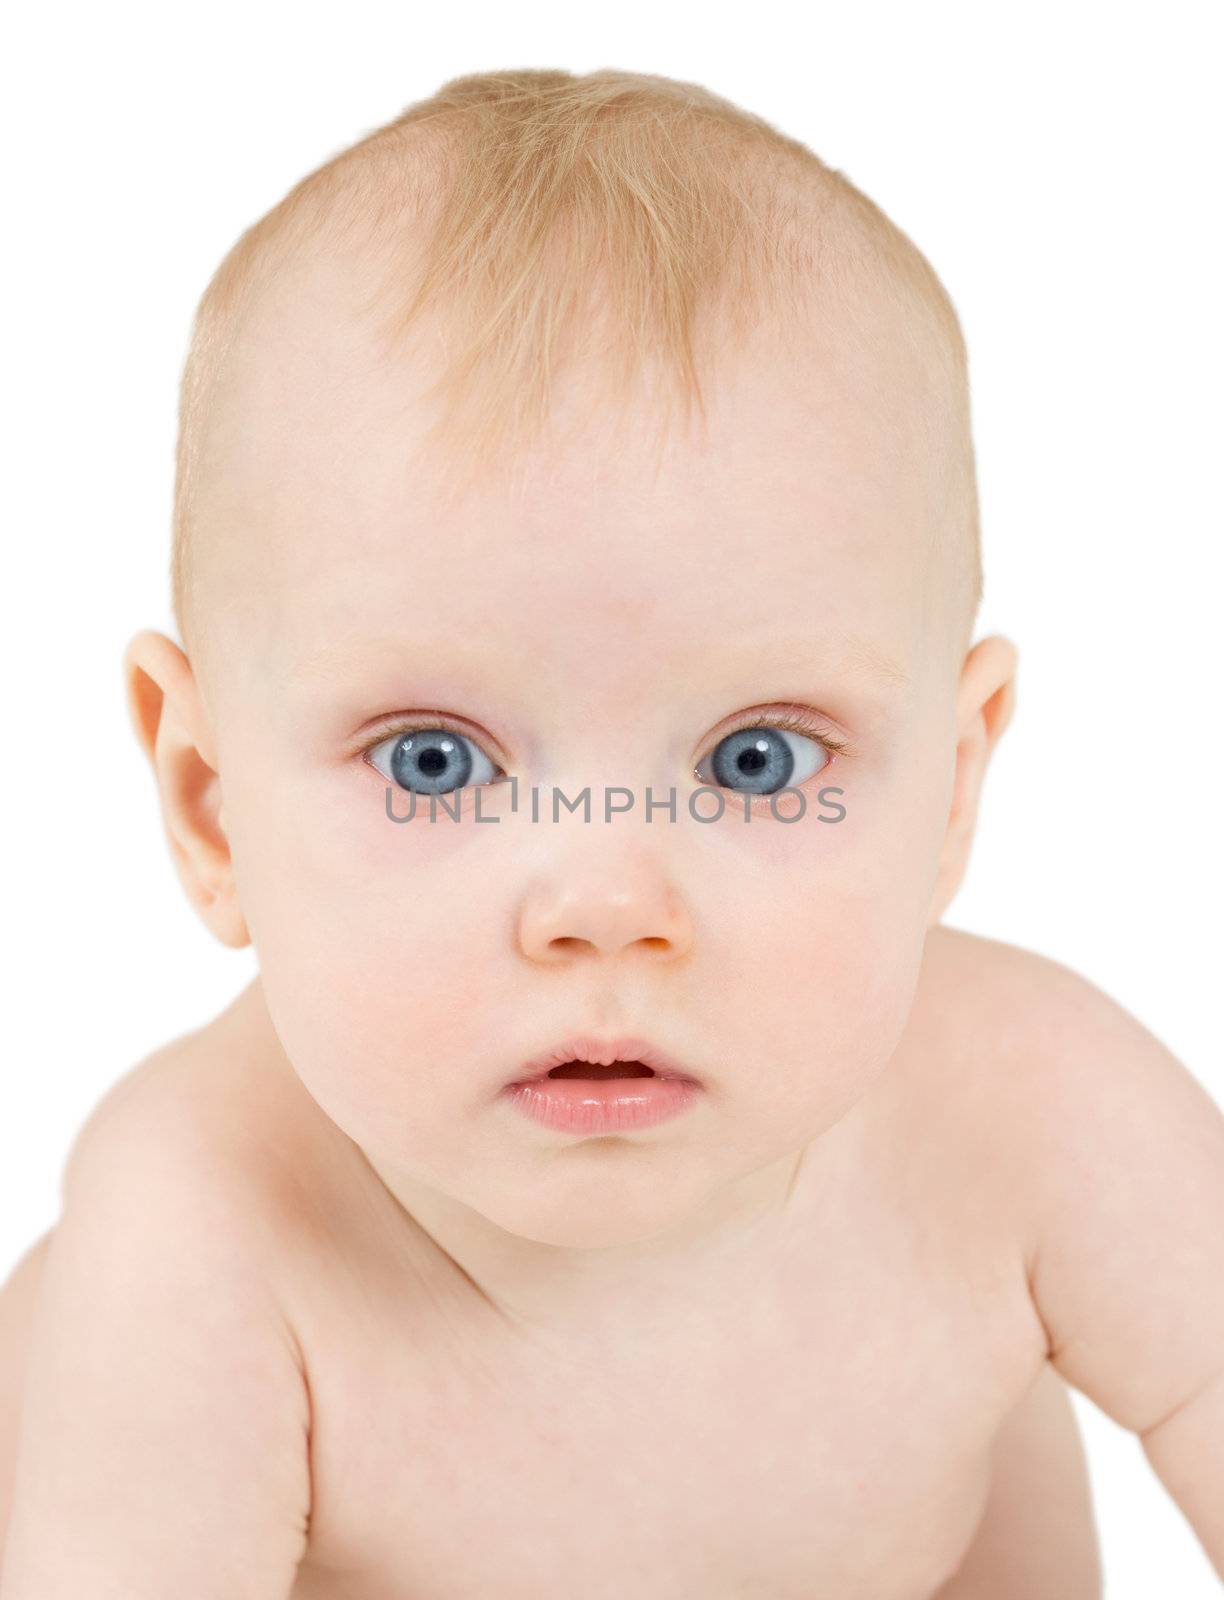 Portrait of a baby, isolated on a white background